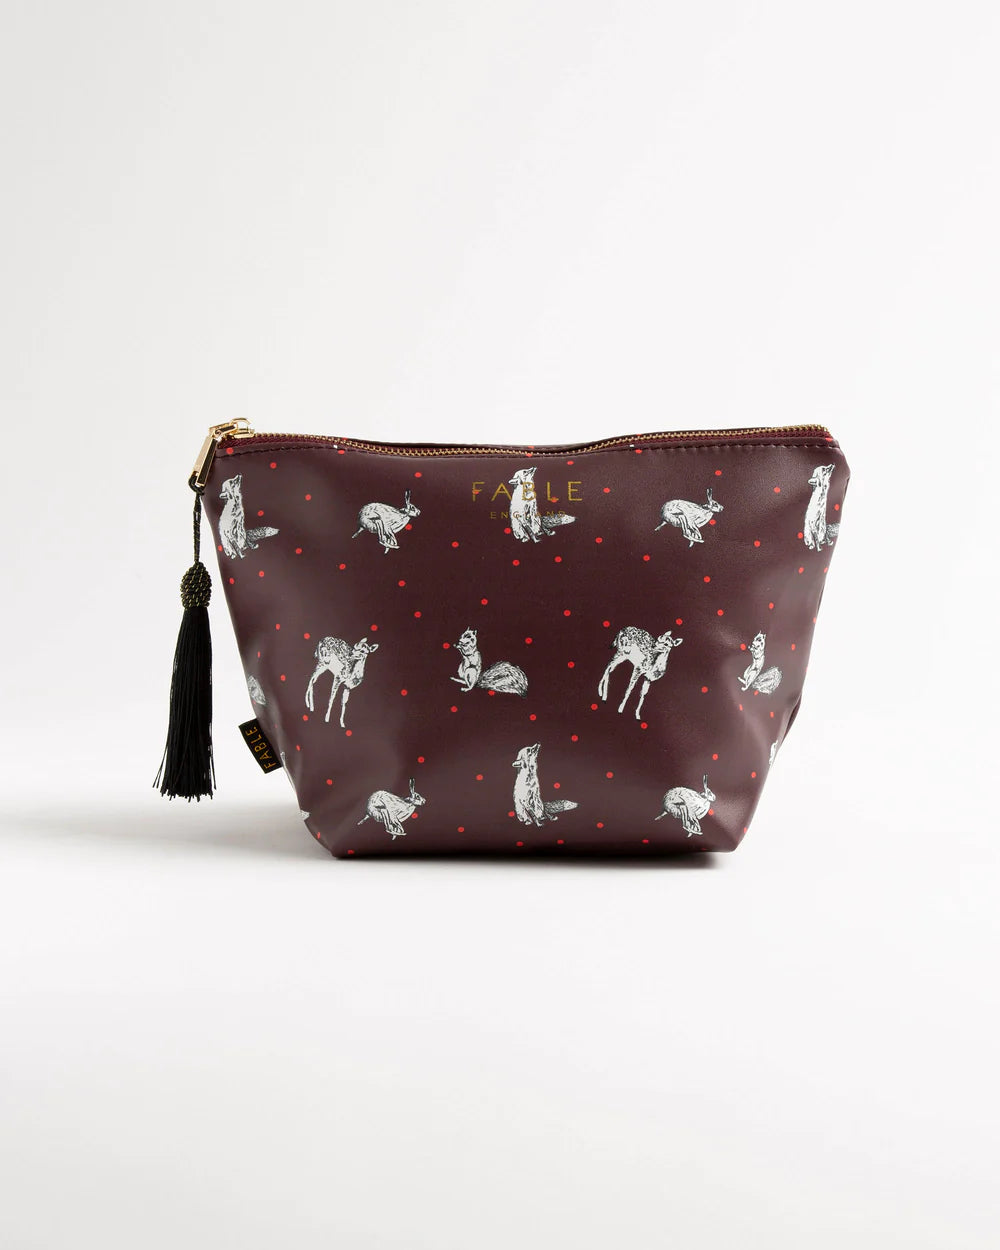 Winterhill Large Makeup Bag by Fable England